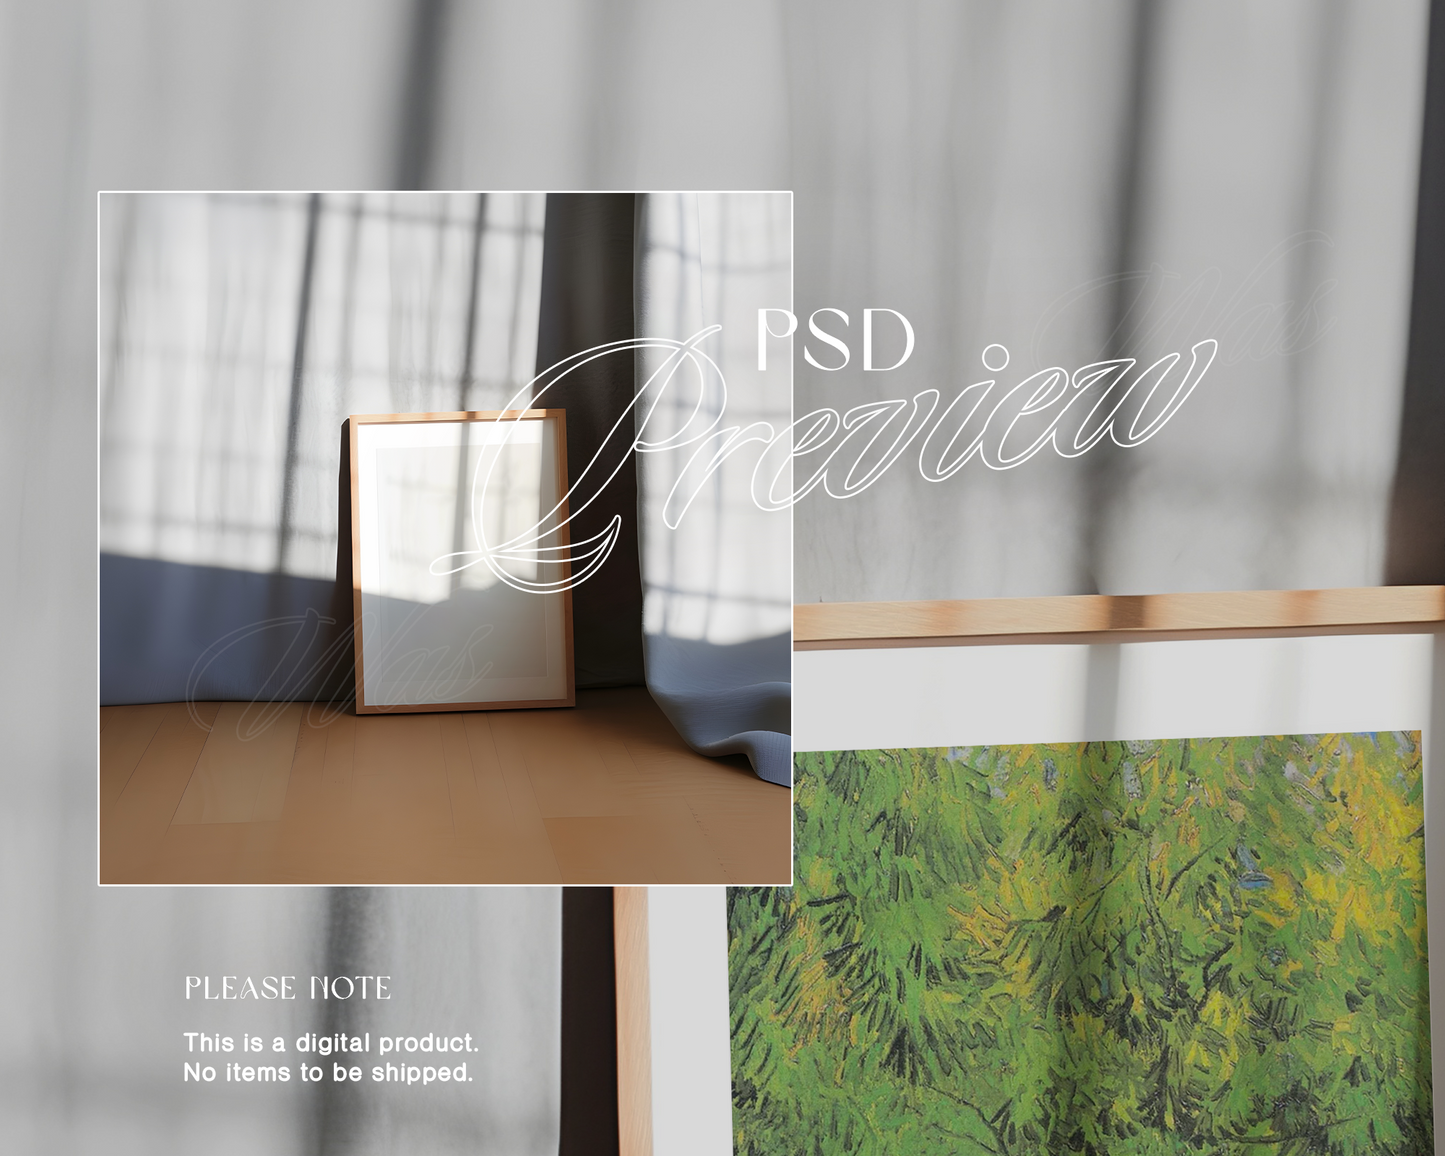 DIN A Wood Frame with Curtains Mockup